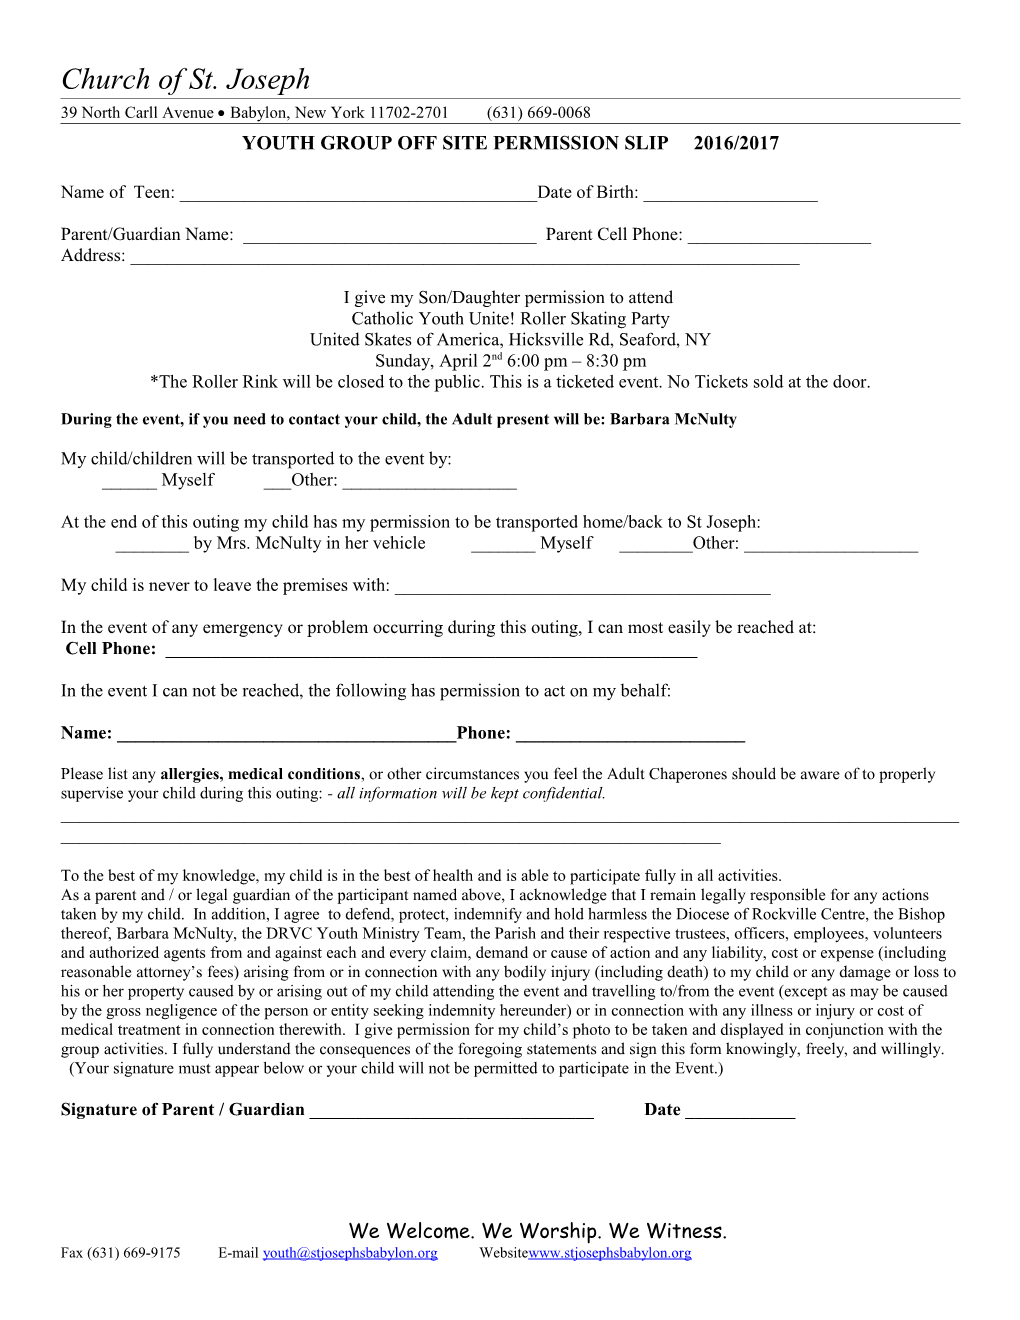 Church of St. Joseph Youth Group Off Site Permission Slip 2012/2013